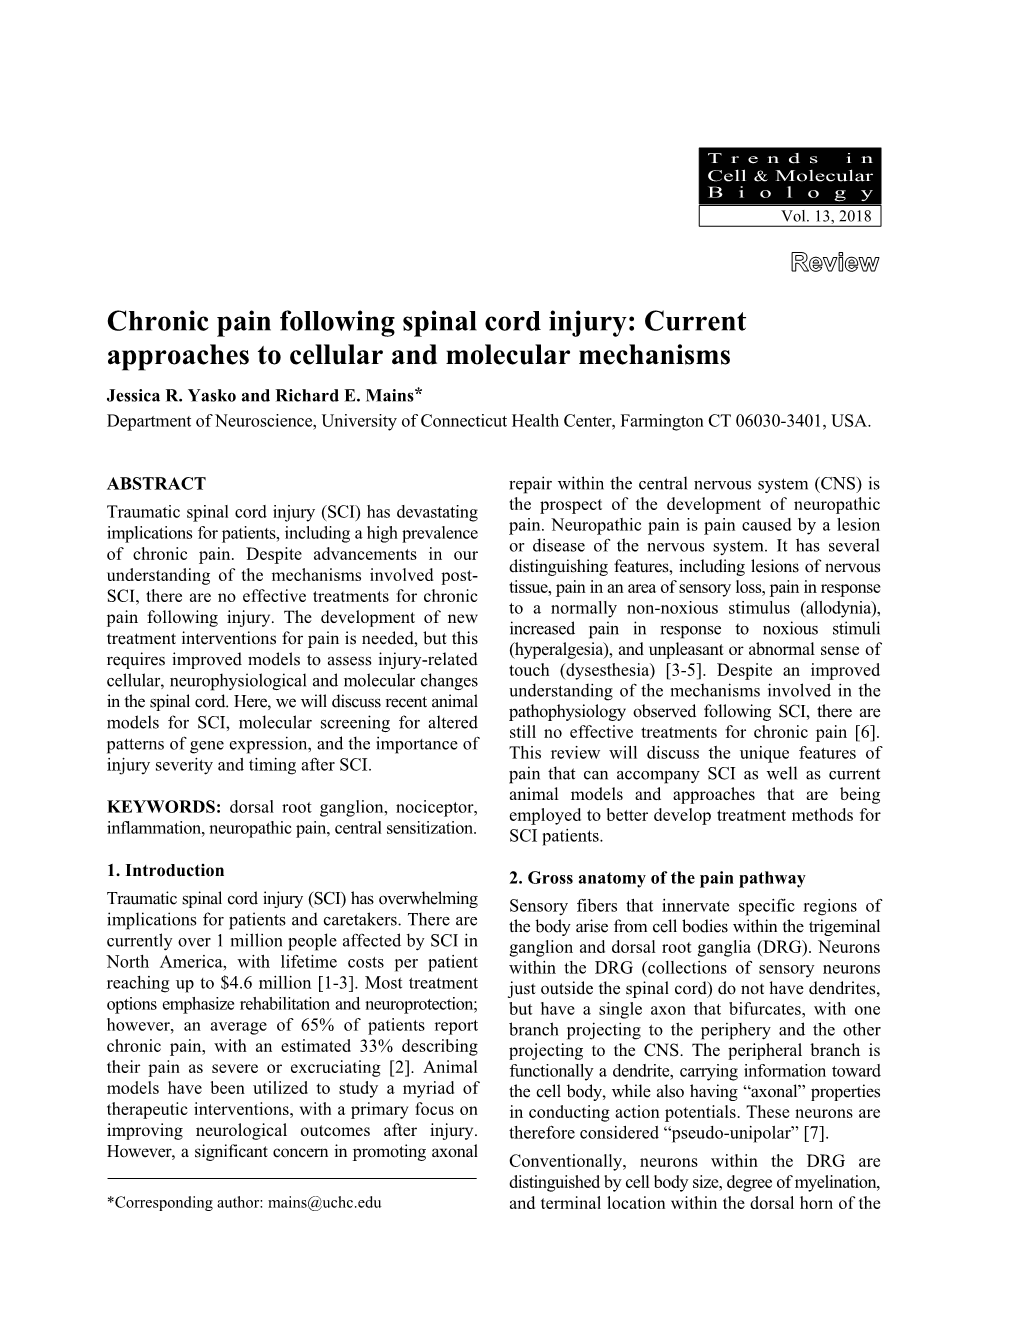 Chronic Pain Following Spinal Cord Injury 69